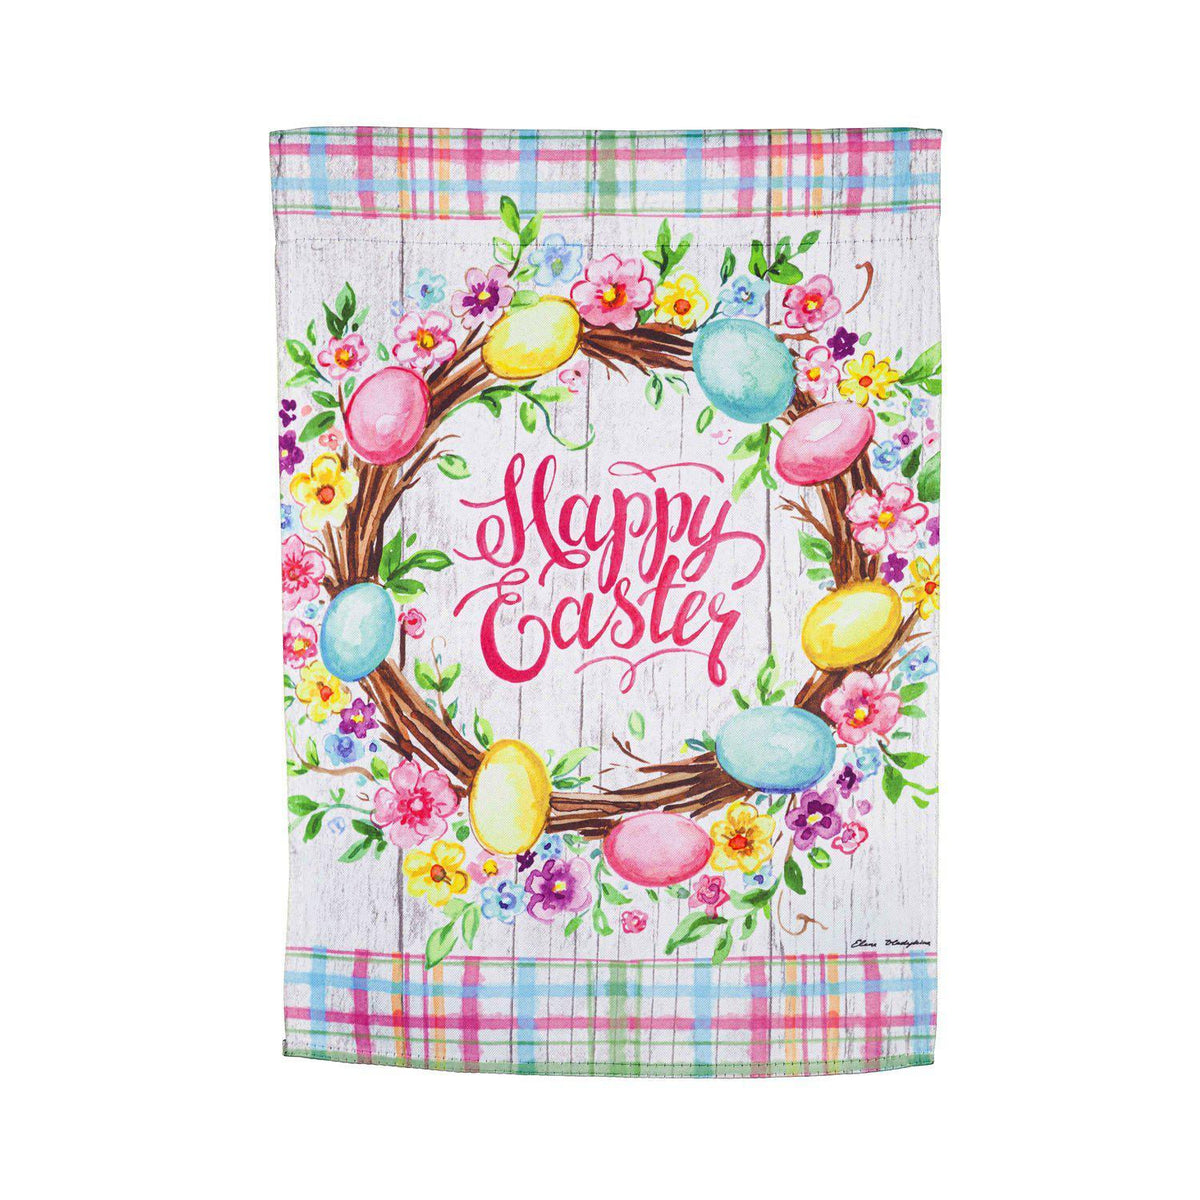 The Easter Floral Wreath house banner features a grapevine wreath of colored eggs and spring flowers and the words "Happy Easter". 